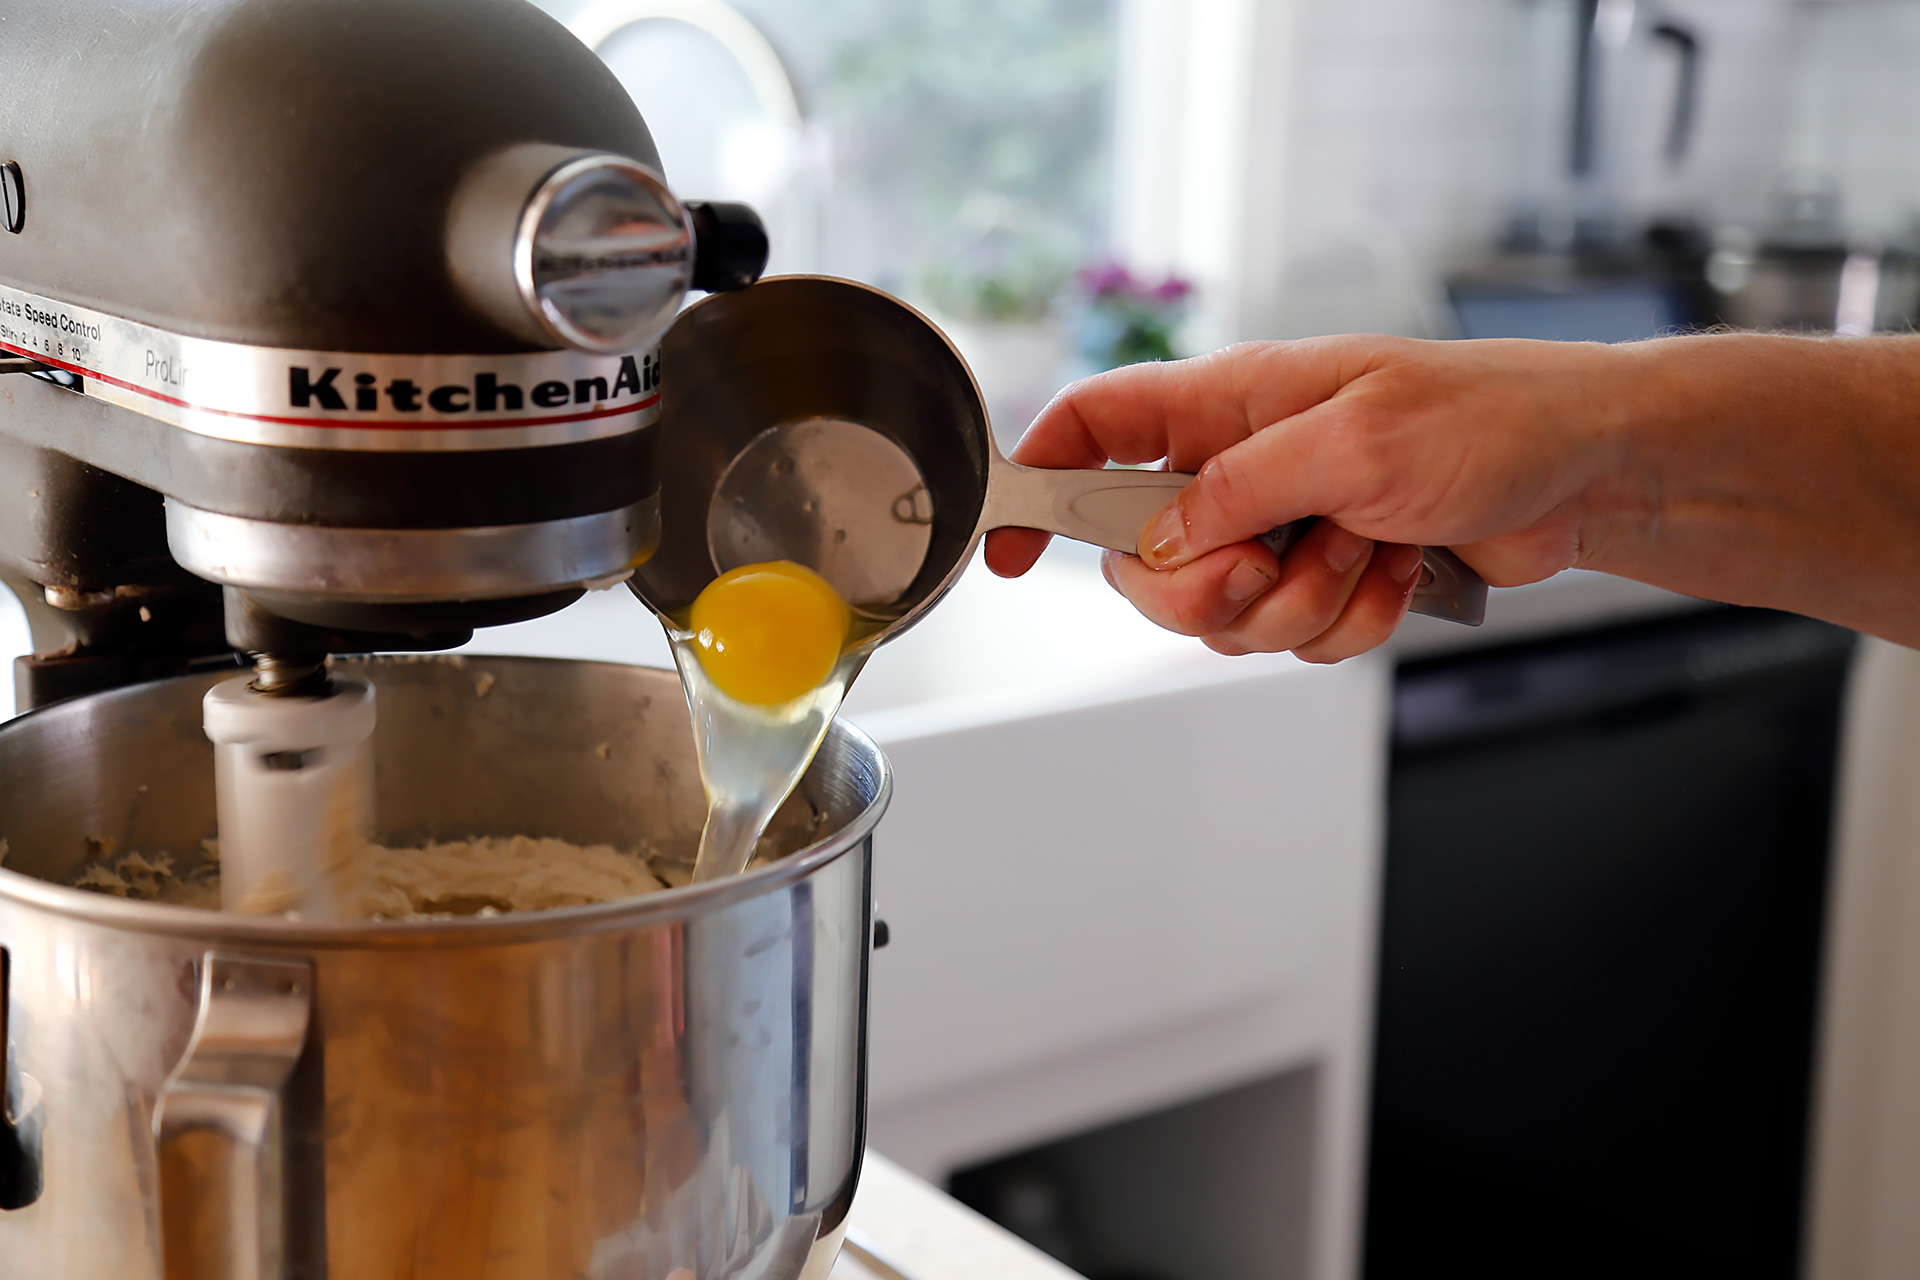 Beat in the eggs one at a time, scraping down the sides of the bowl.